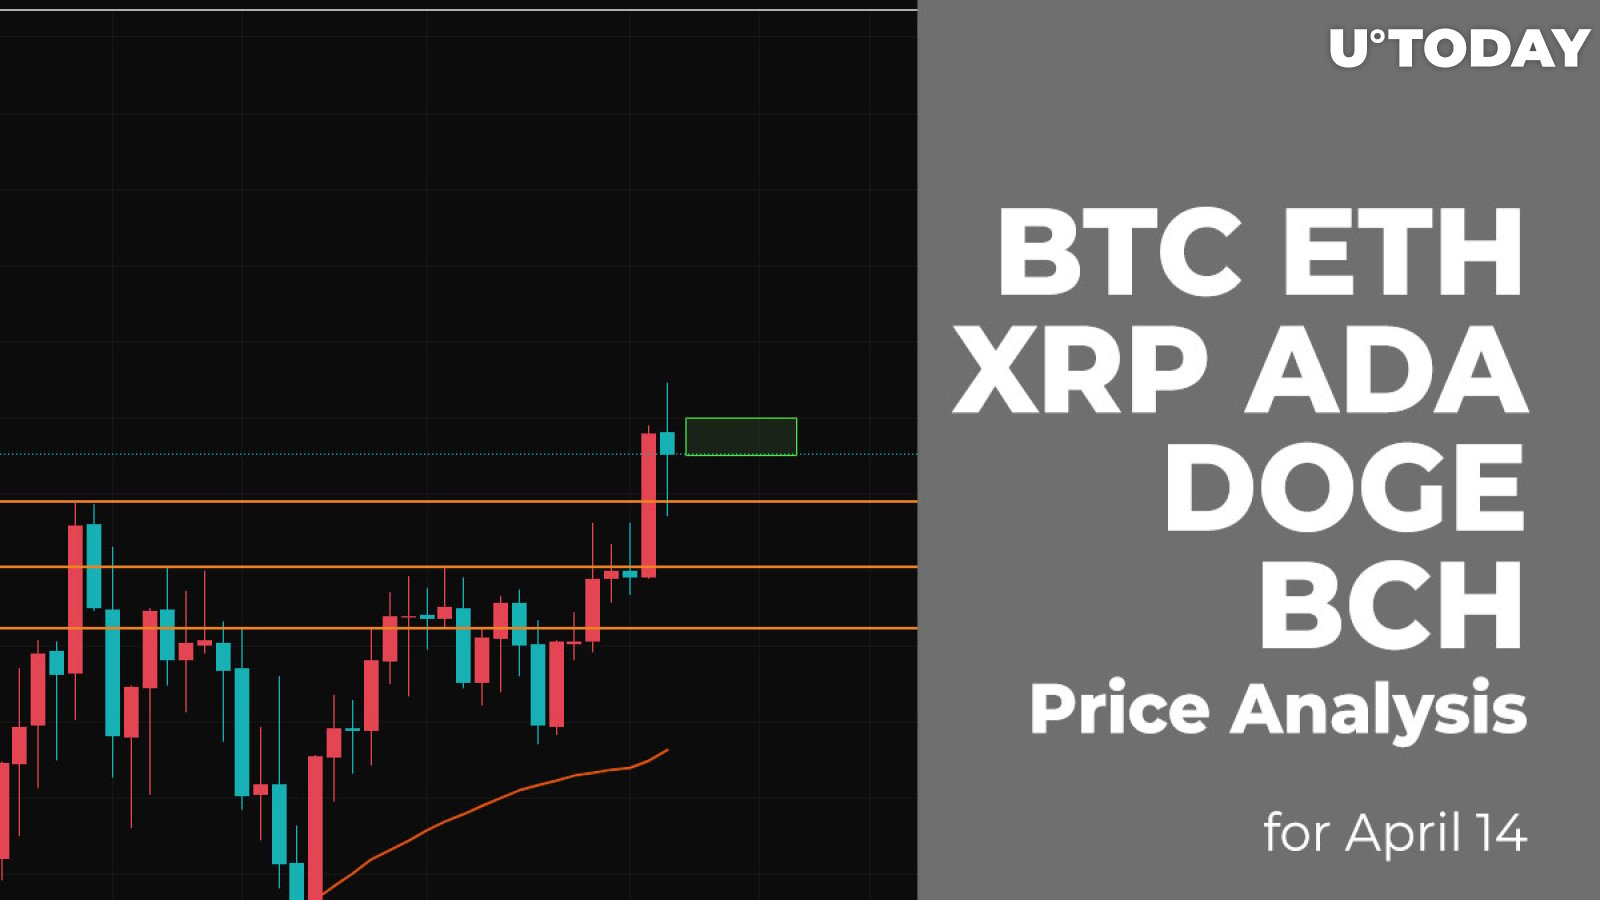 BTC, ETH, XRP, ADA, DOGE and BCH Price Analysis for April 14